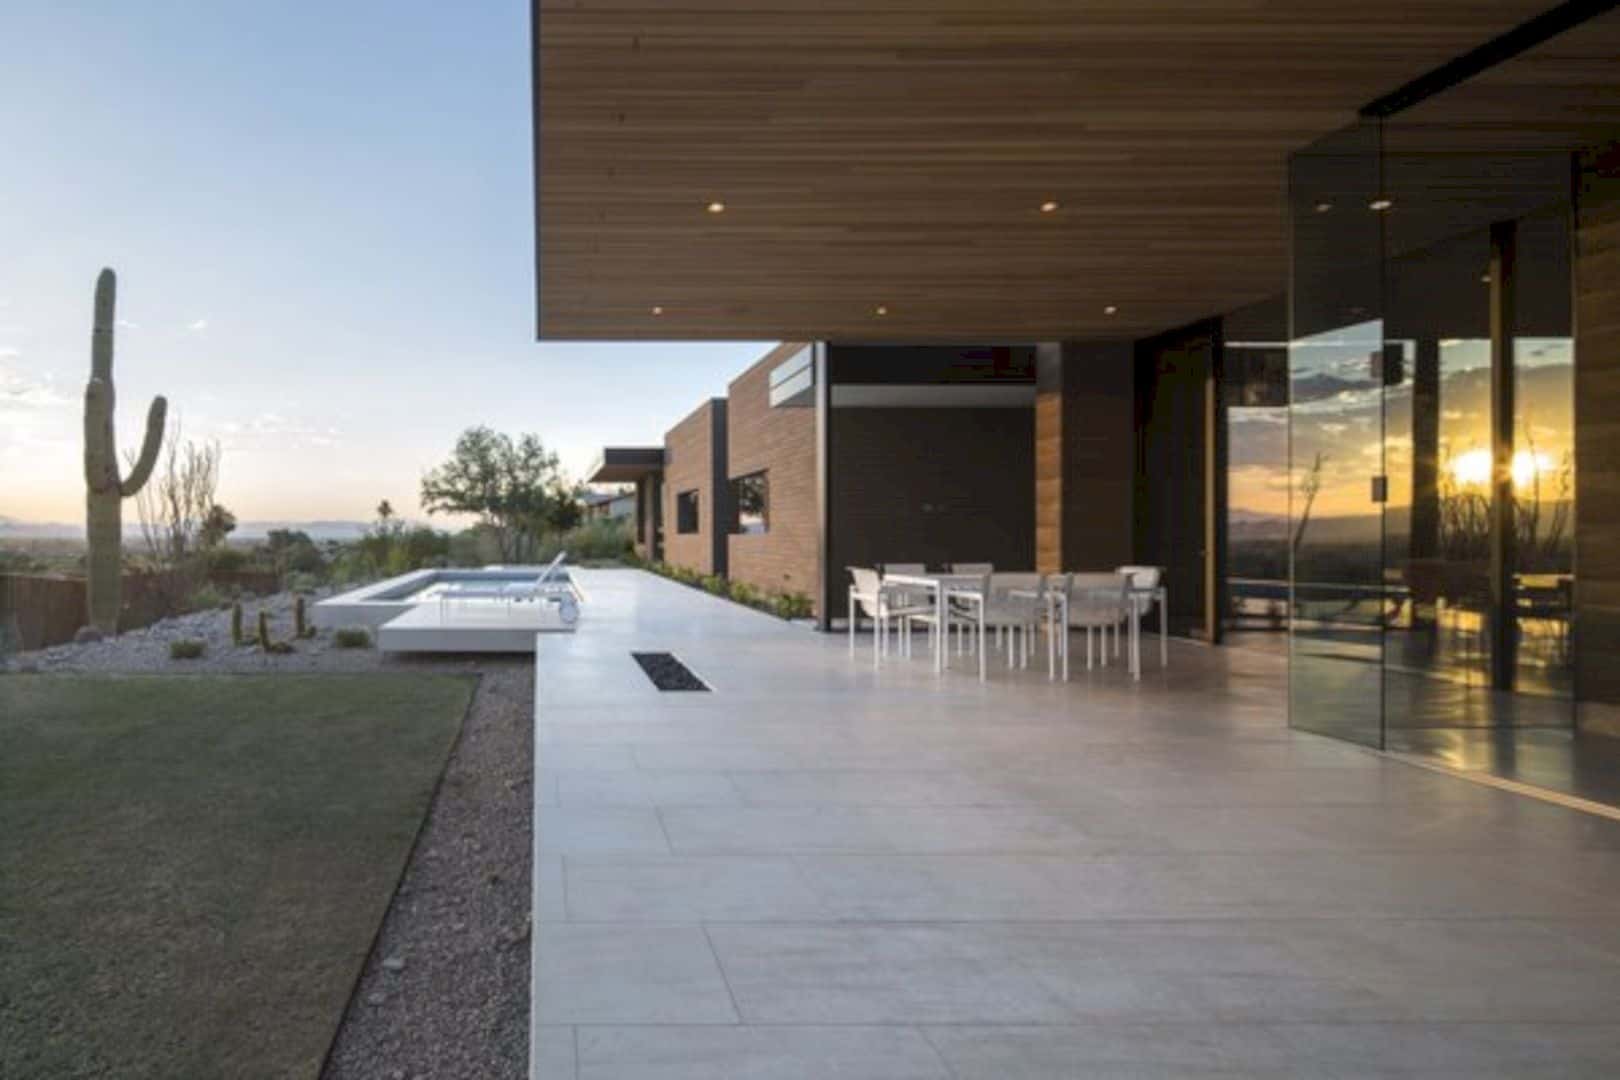 The Rammed Earth Modern Residence A Modest Yet Sophisticated Residence Dominated By Humble Materials 17